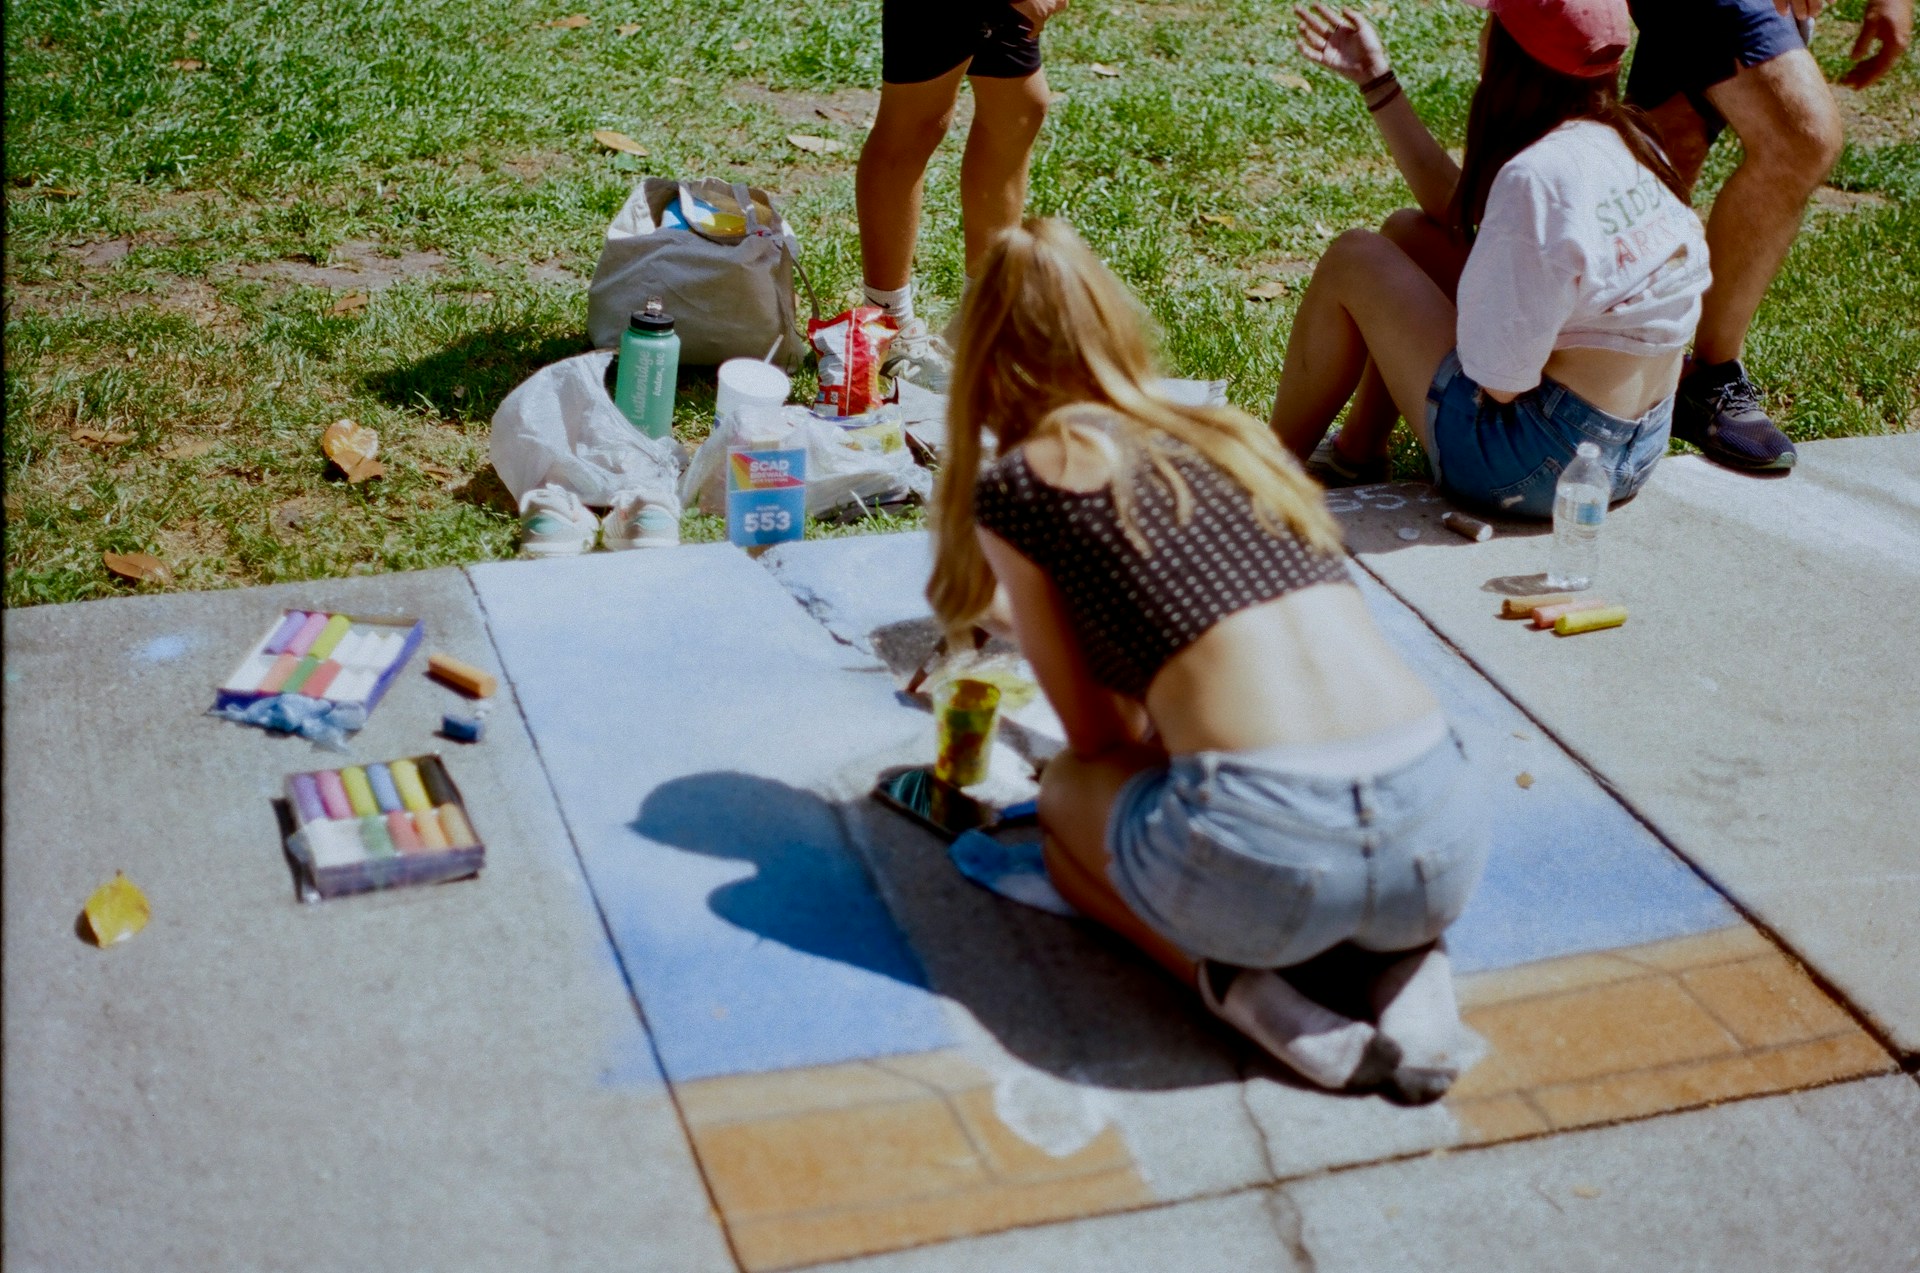 a student painting in a park